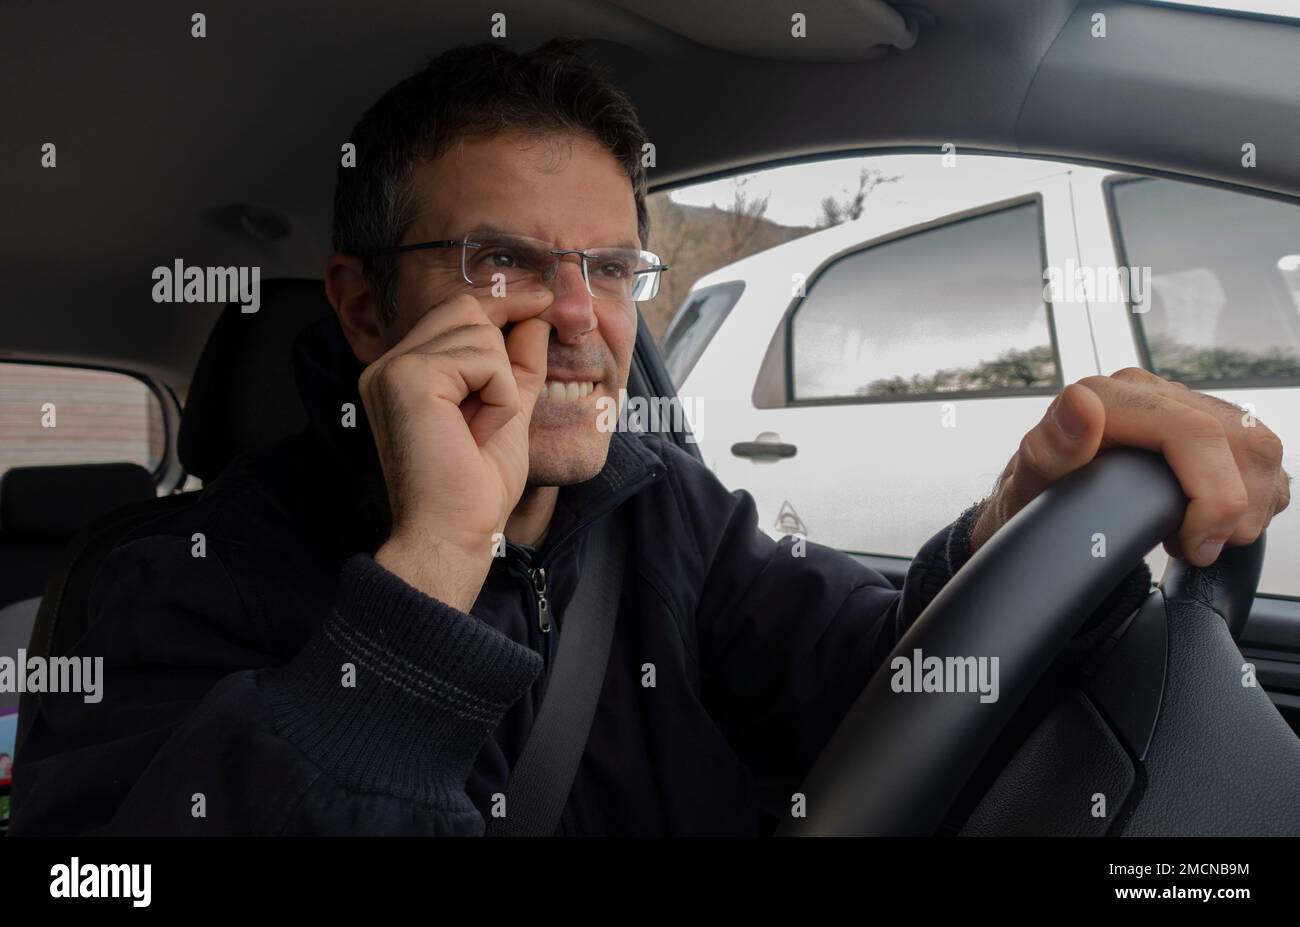 Man in car with finger into nose while driving Stock Photo